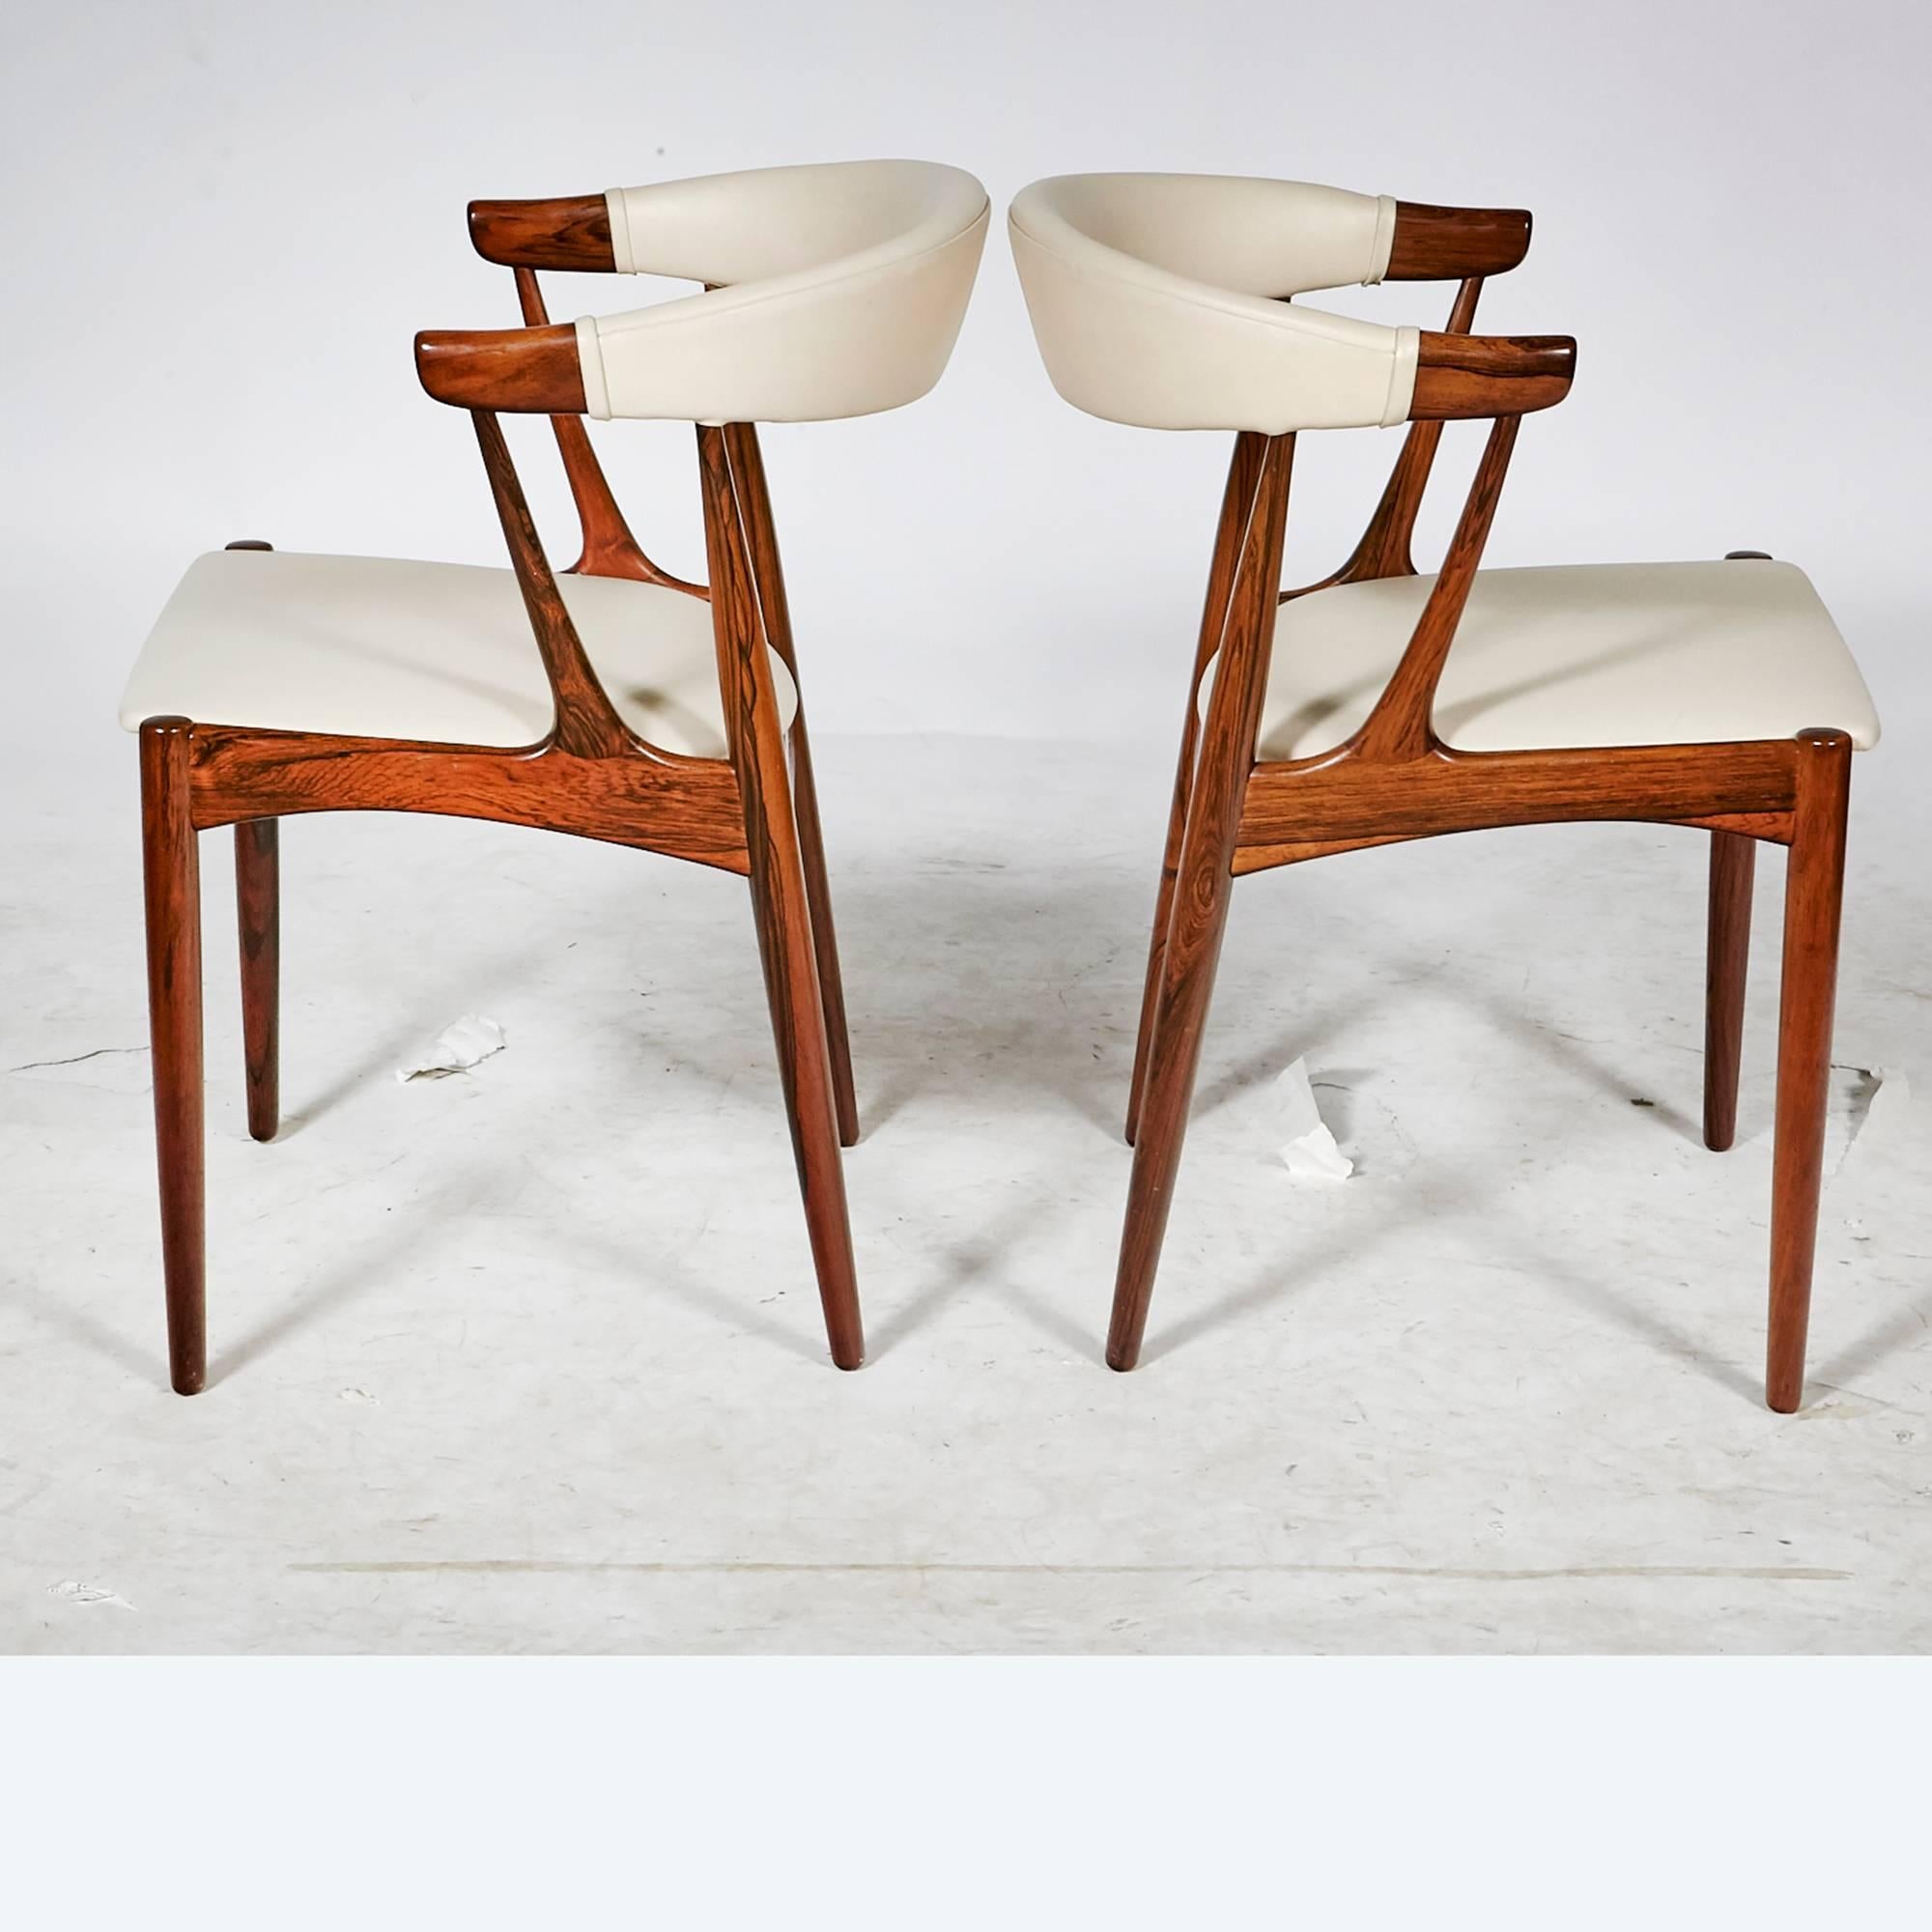 Scandinavian Modern Danish Rosewood and Leather Dining Chairs by Johannes Andersen, 1960s For Sale